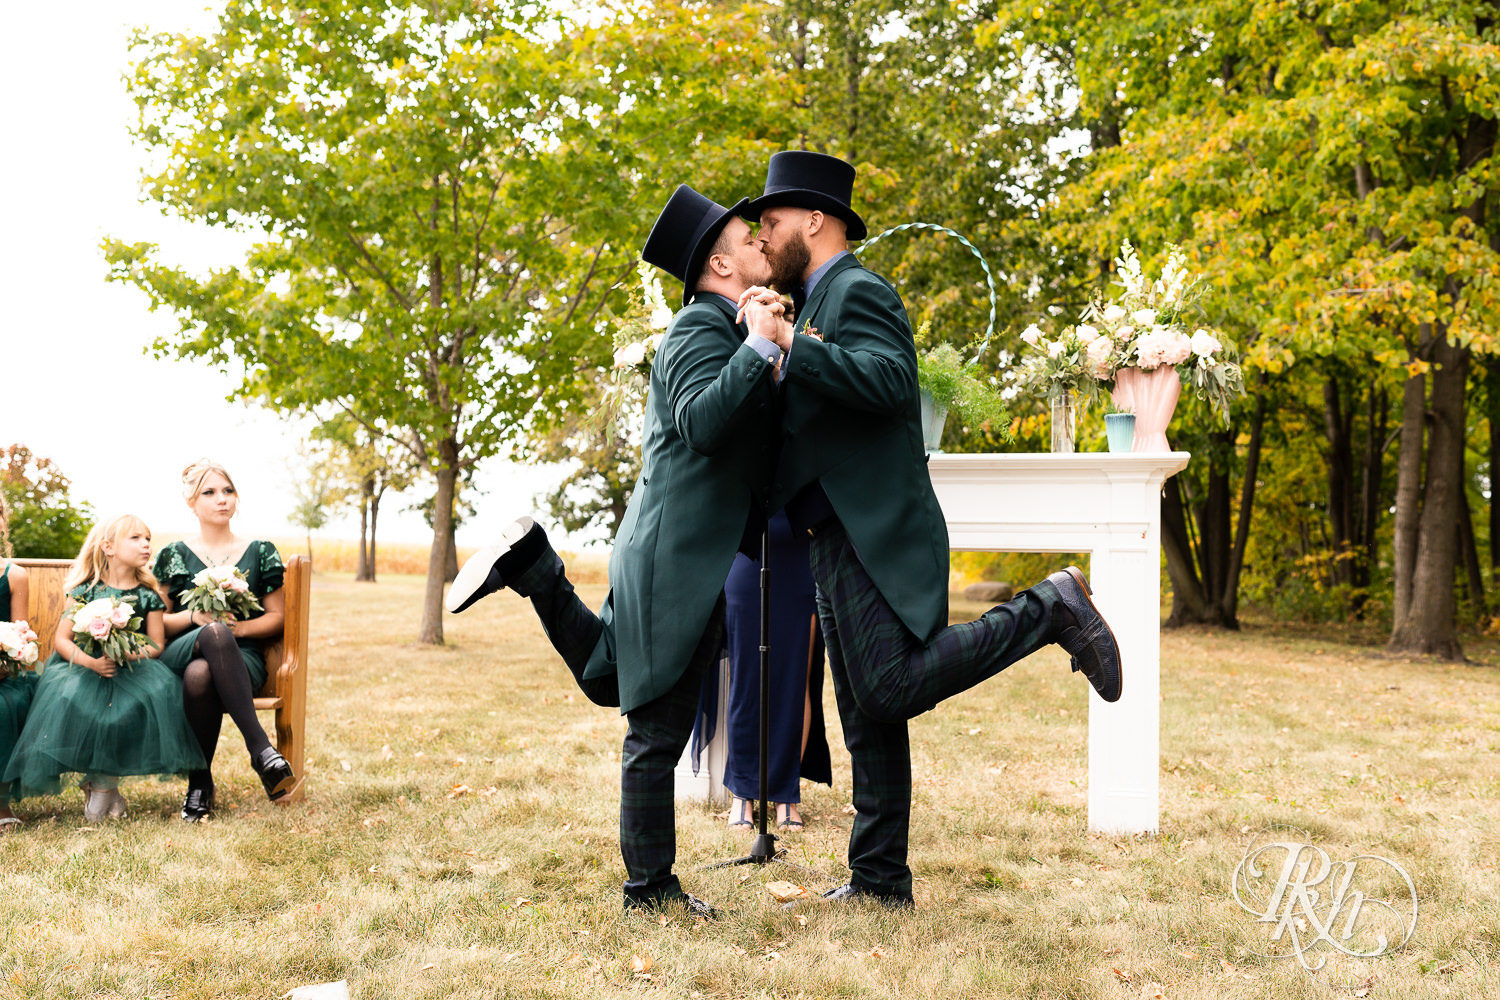 Grooms sharing first kiss at their ceremony in Belle Plaine, Minnesota.